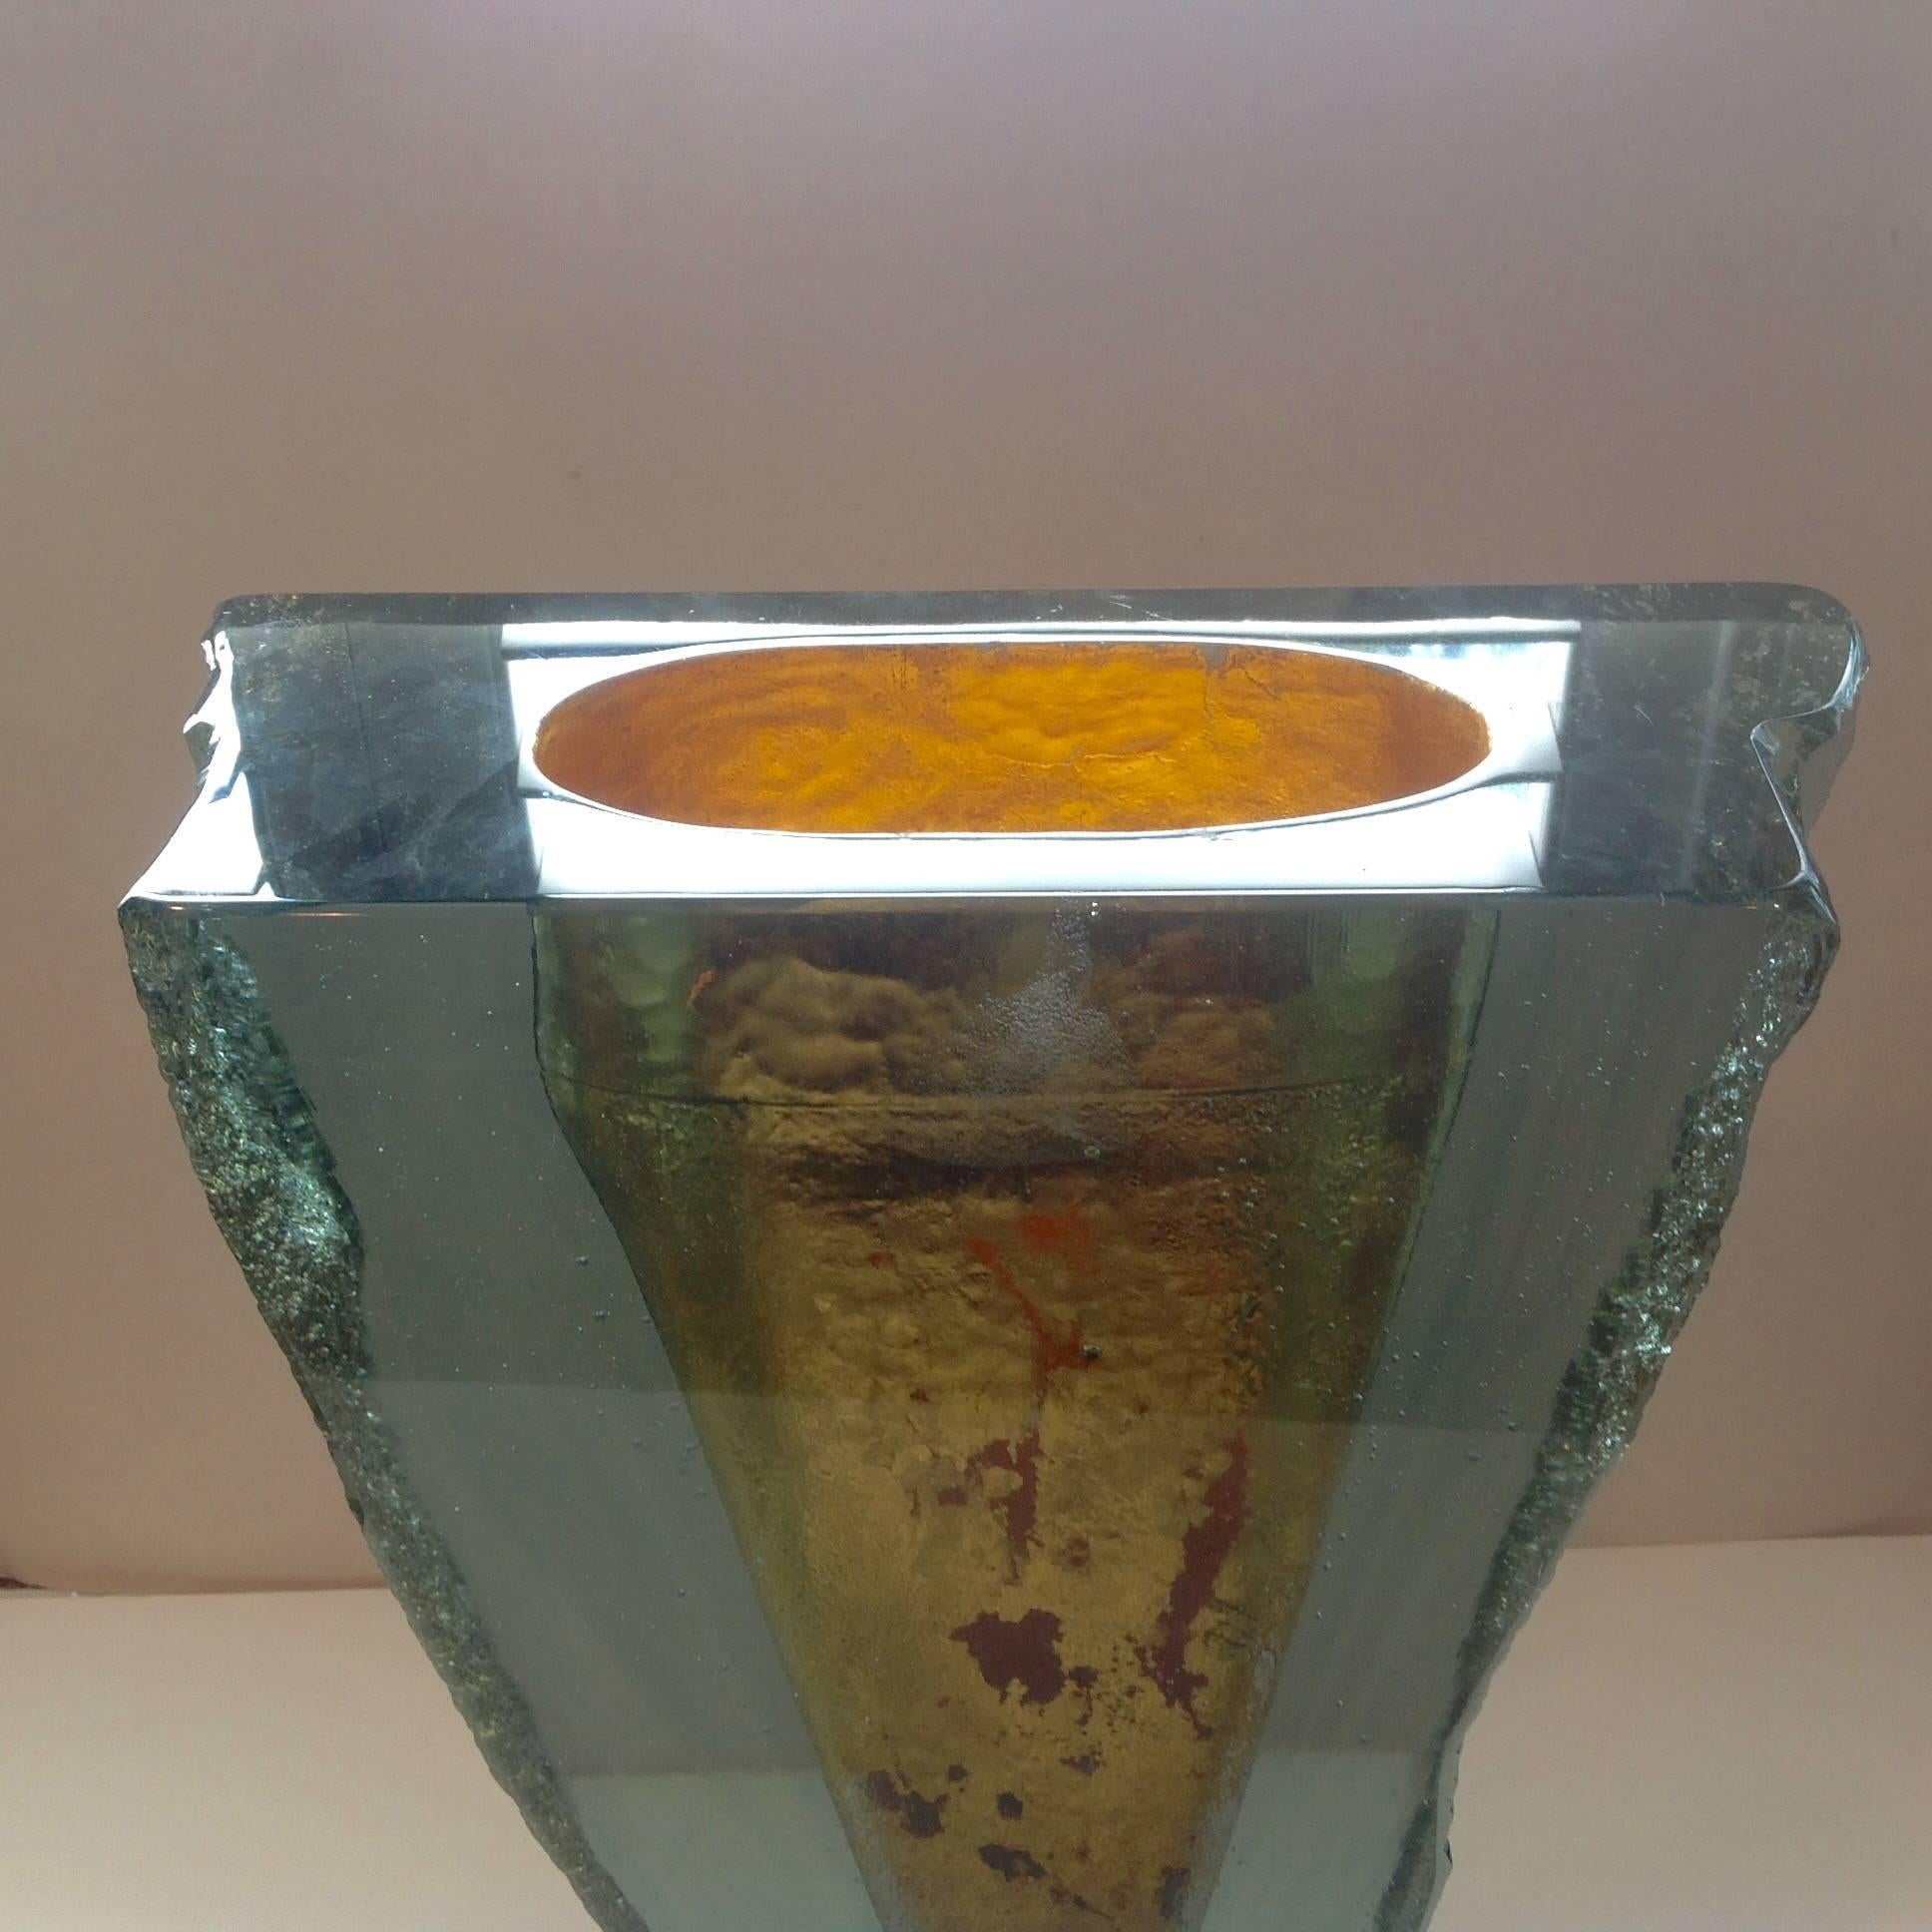 Amazing signed studio glass vase by John Lewis. Gold leaf interior. Leaf is applied in an abstract pattern to look excavated.